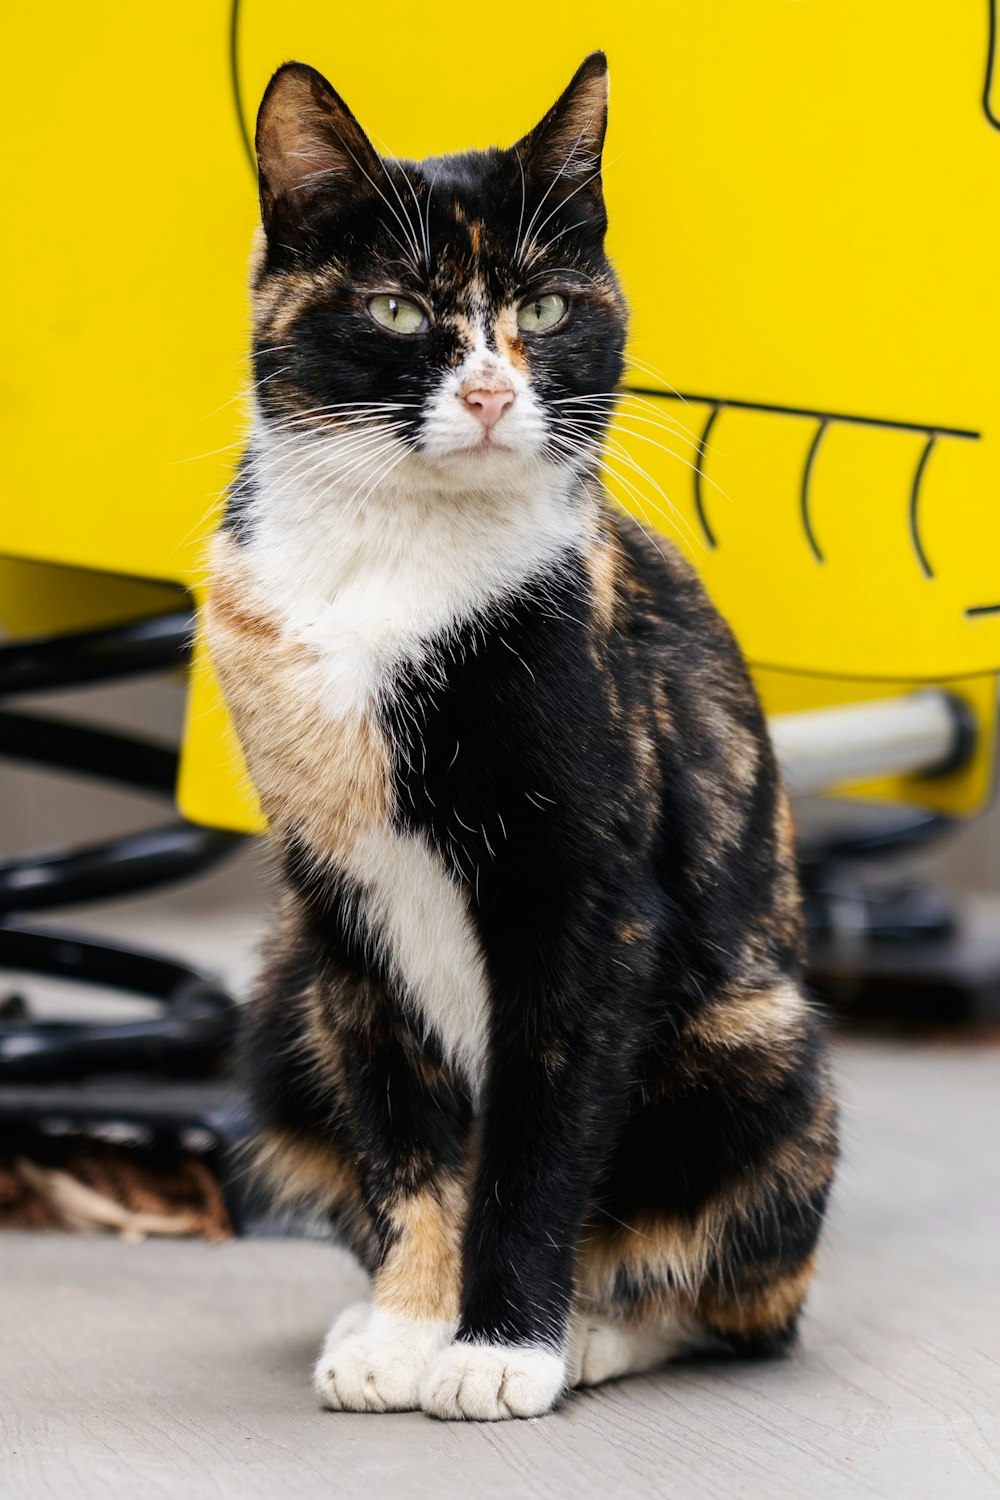 a calico cat sitting in front of a yellow chair